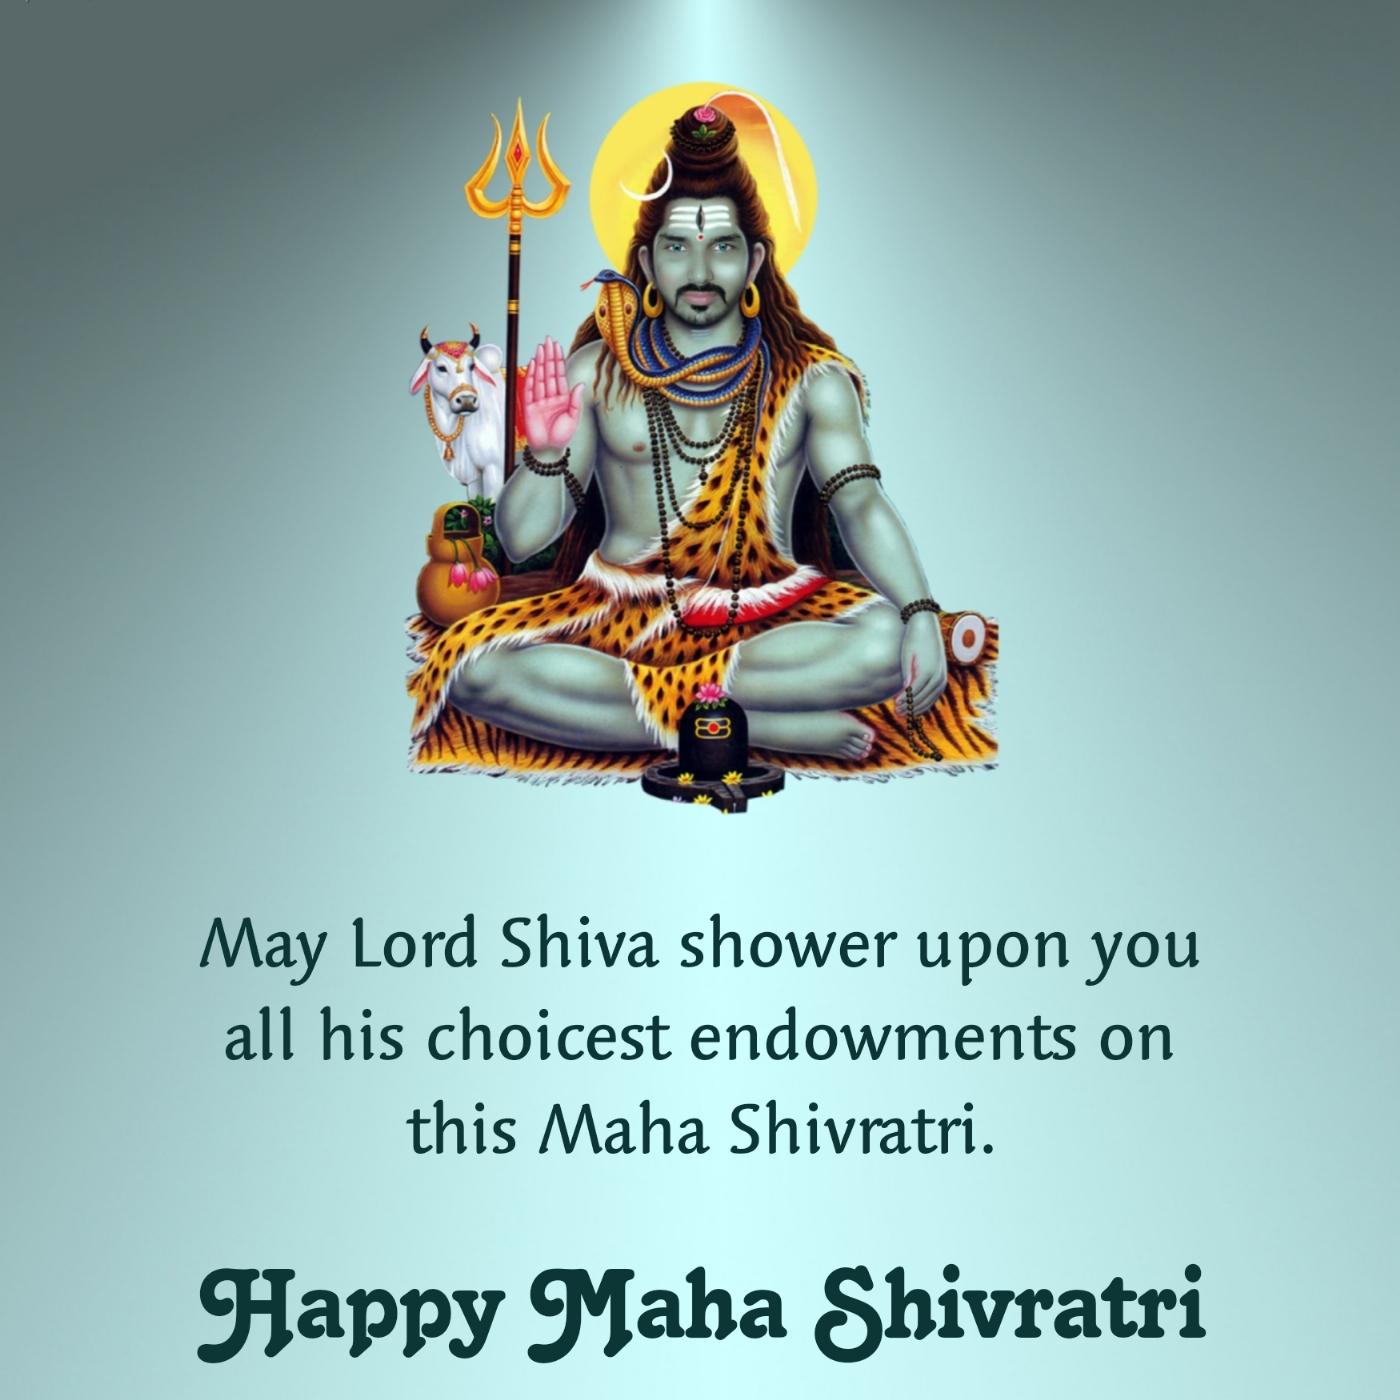 May Lord Shiva shower upon you all his choicest endowments